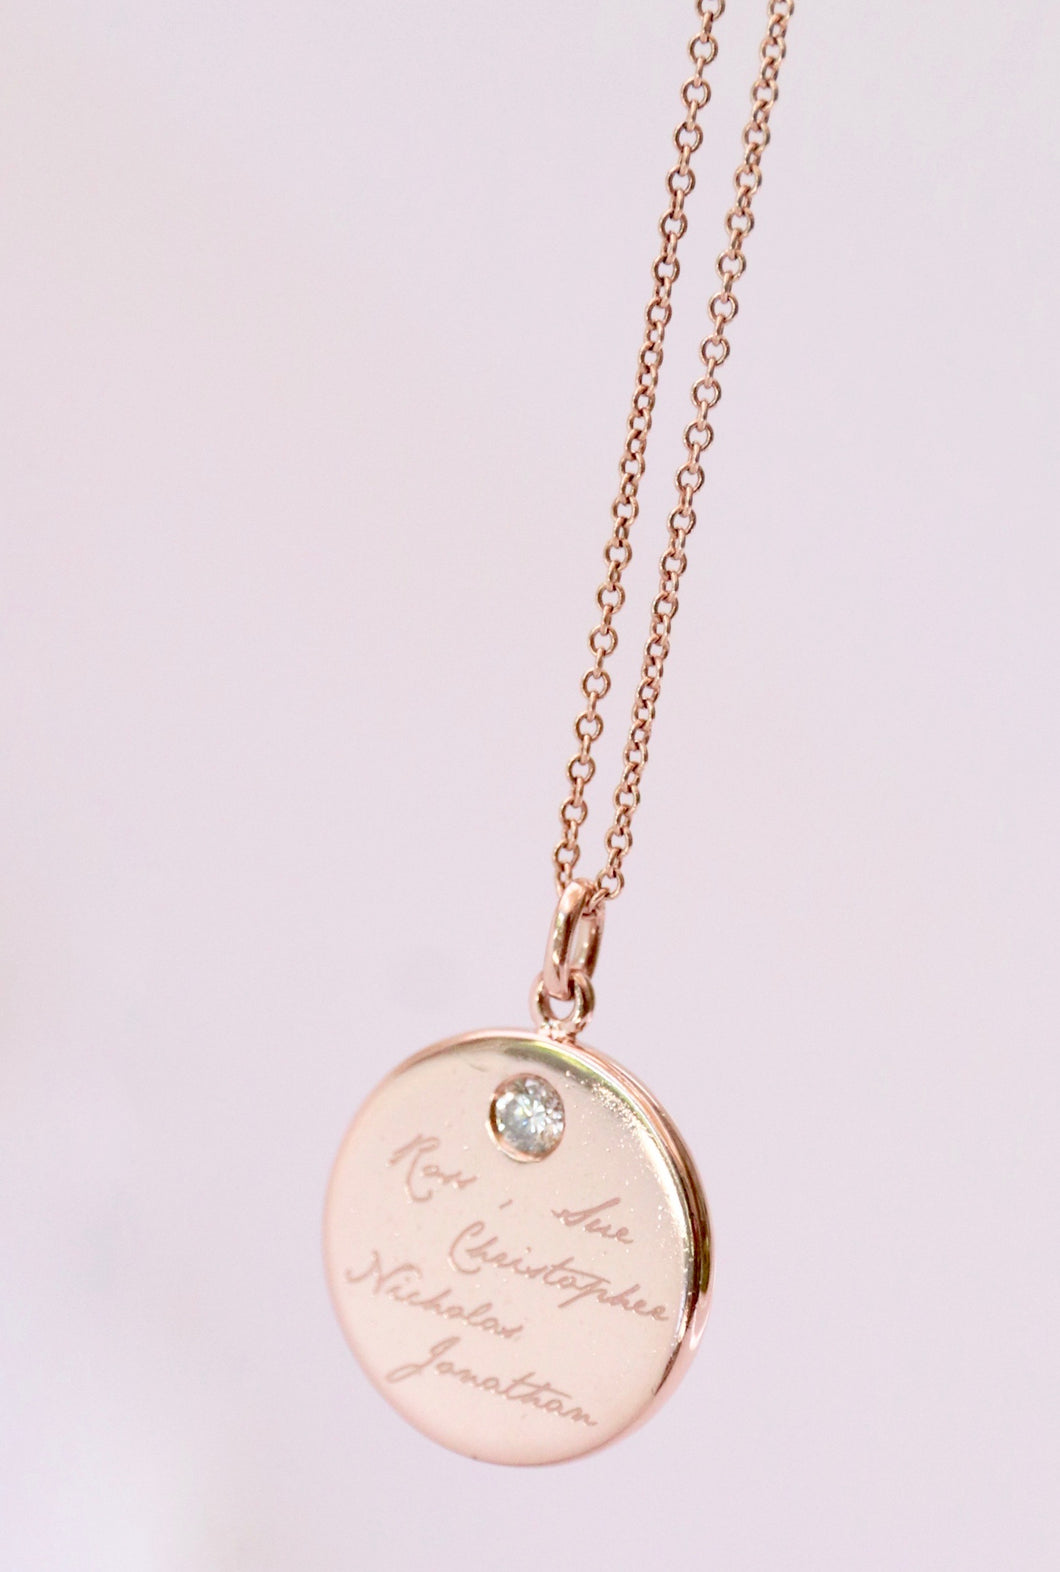 The Jonathan -  13mm Name or Initial Birthstone Pendant